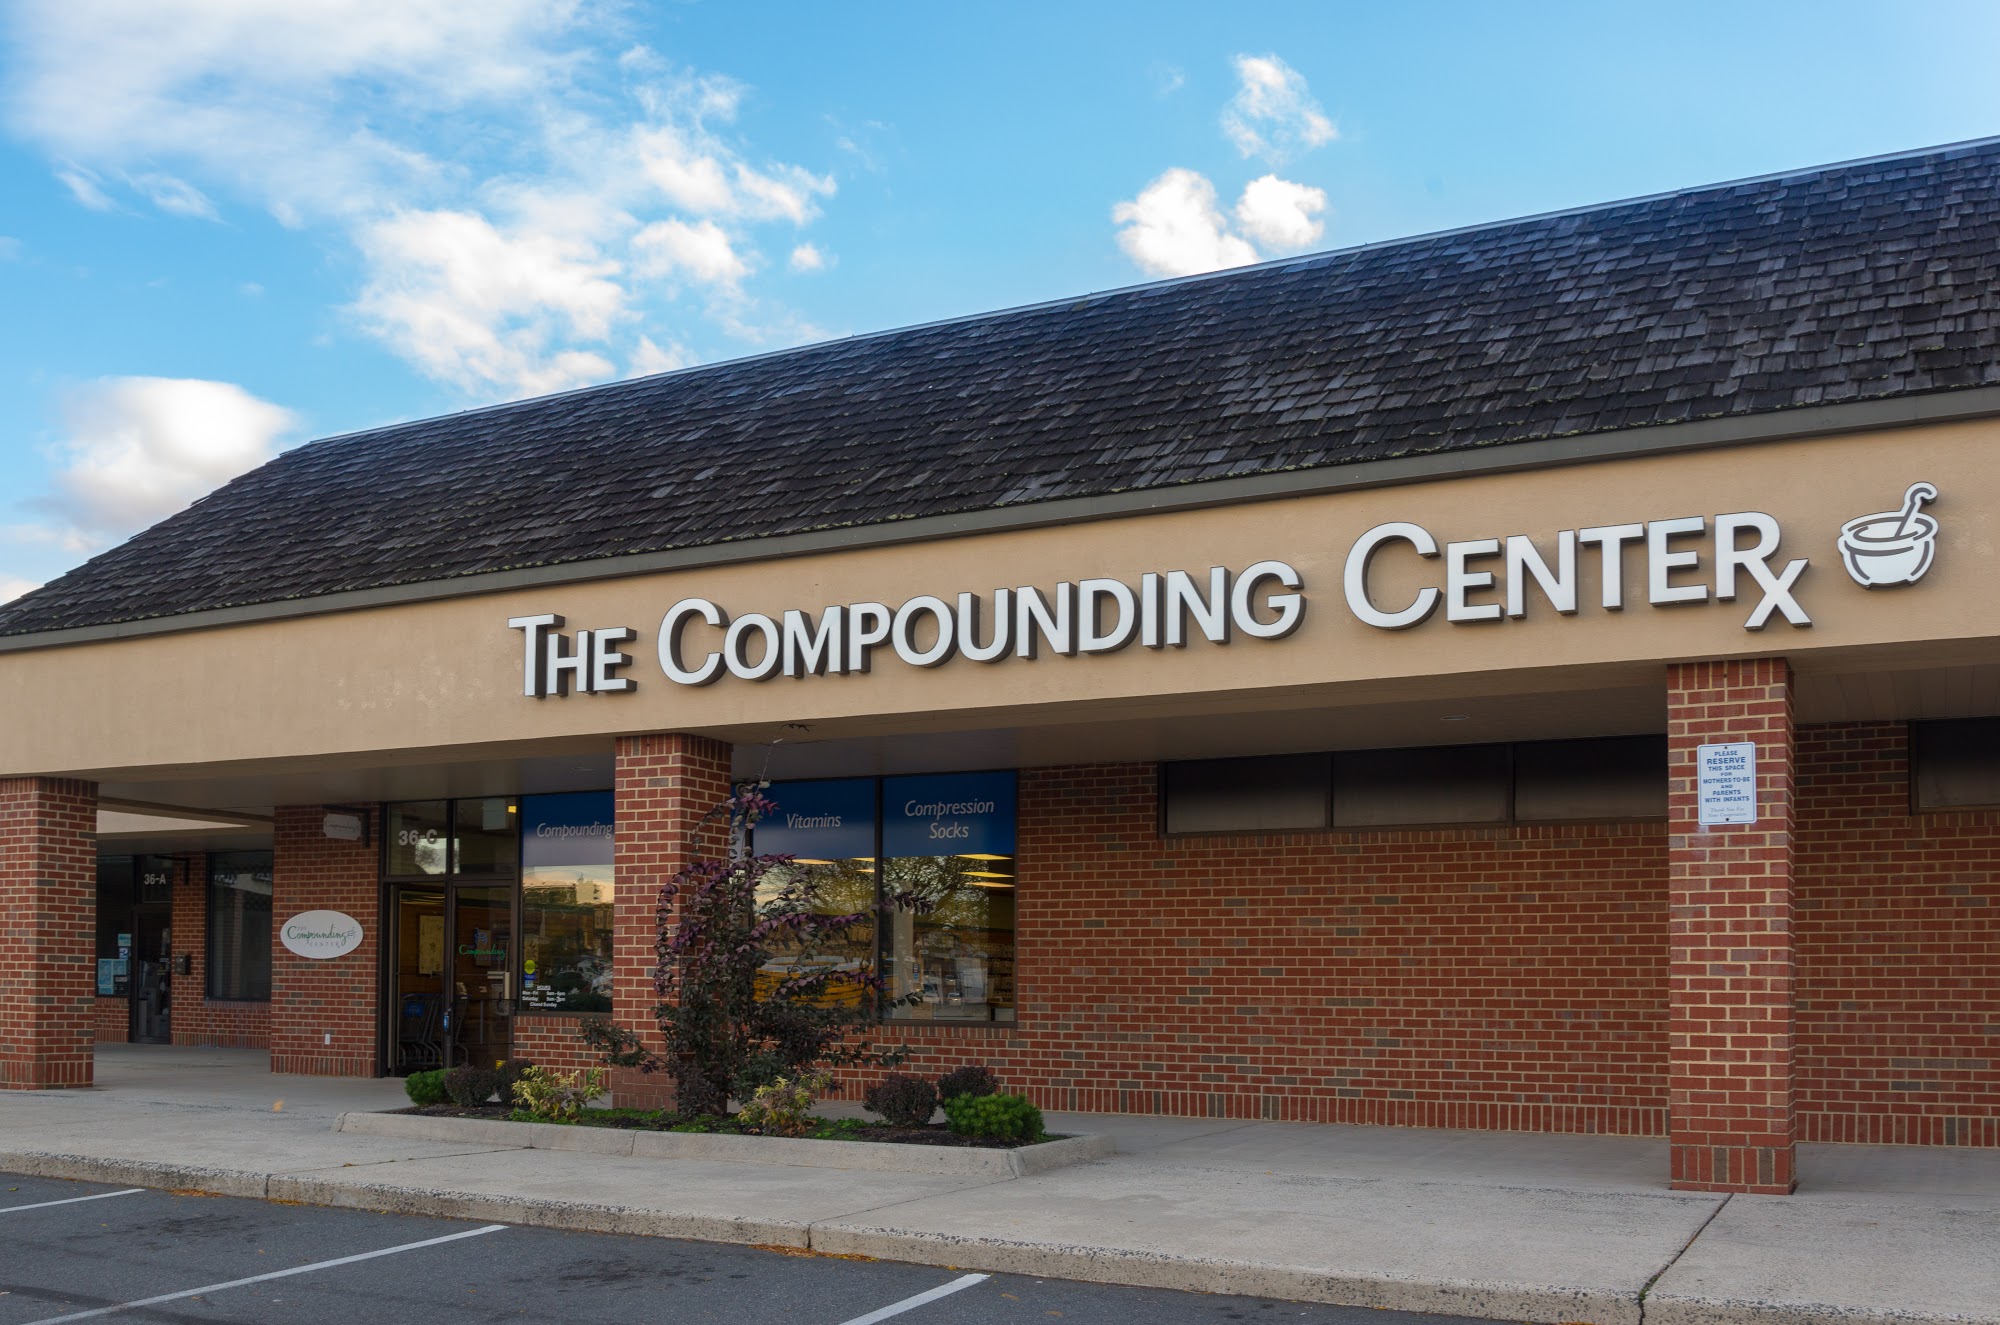 The Compounding Center